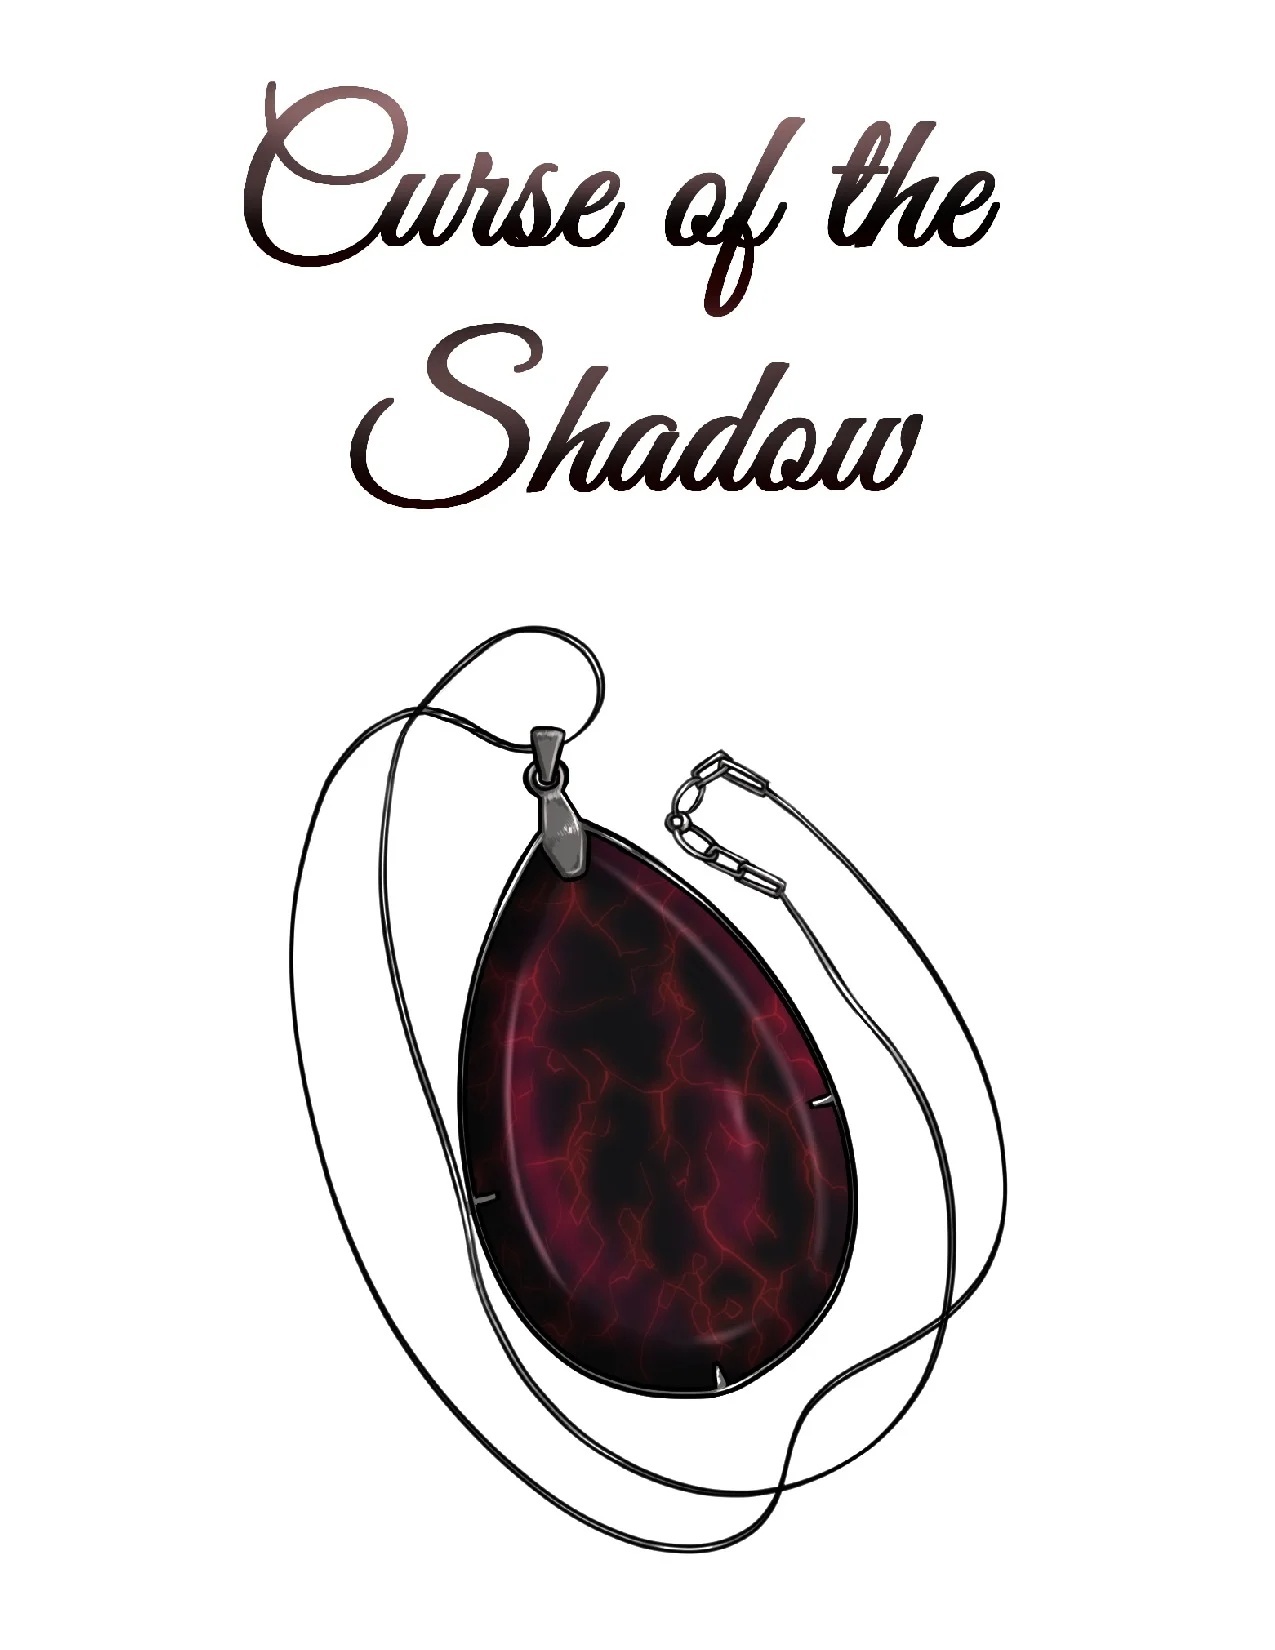 Curse Of The Shadows (completo) - 32